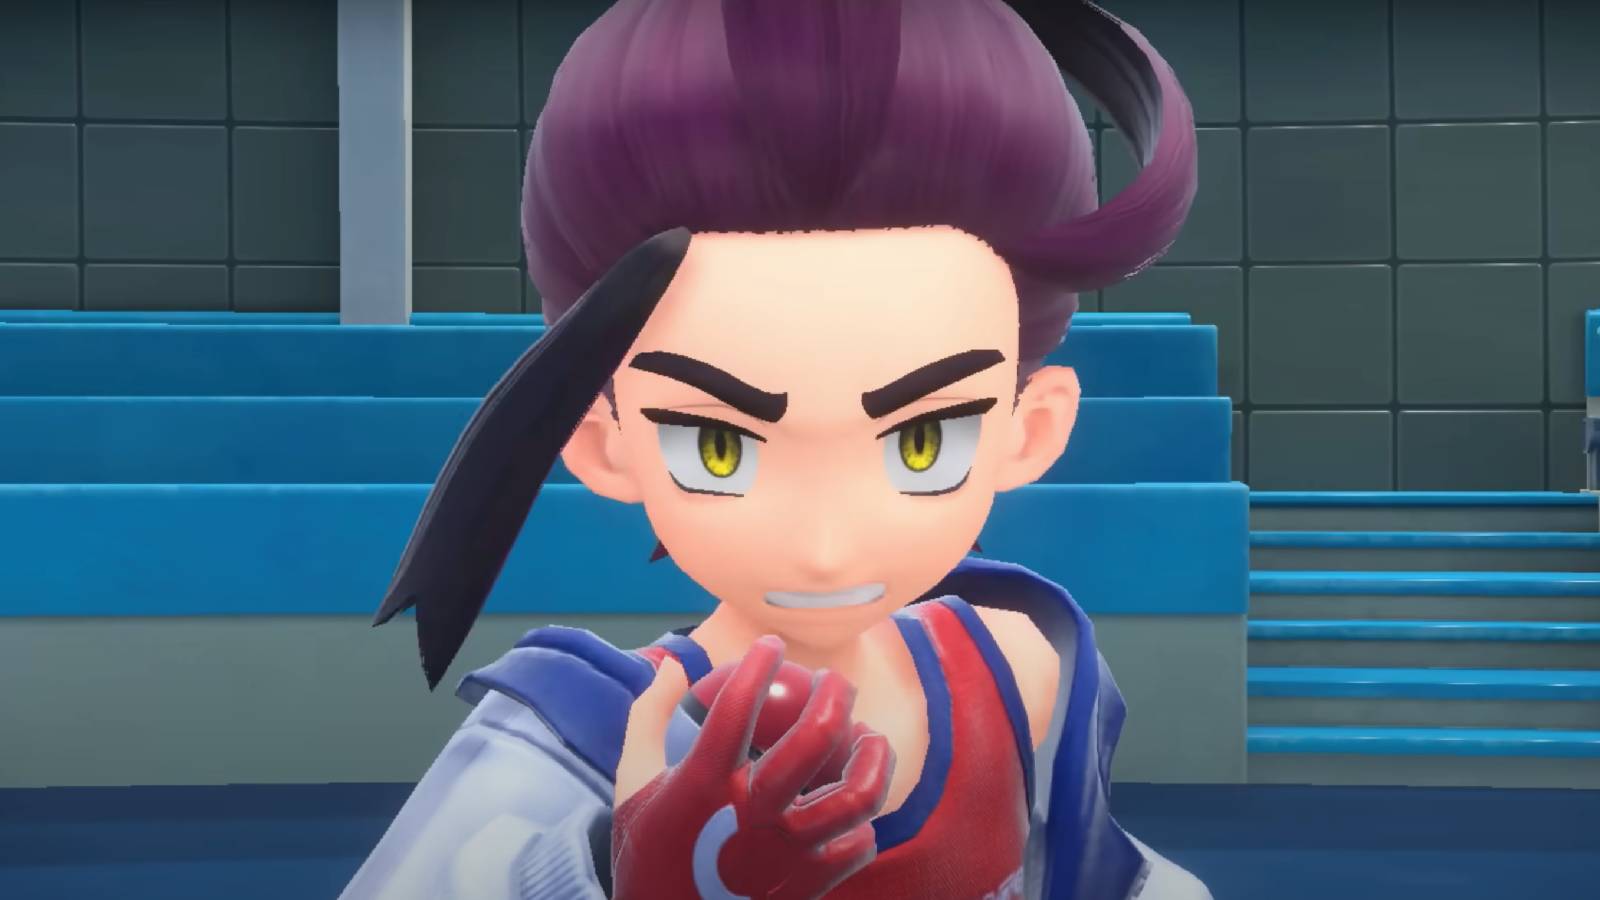 Pokemon Scarlet and Violet trainer Kieran looks determined, clenching their fist